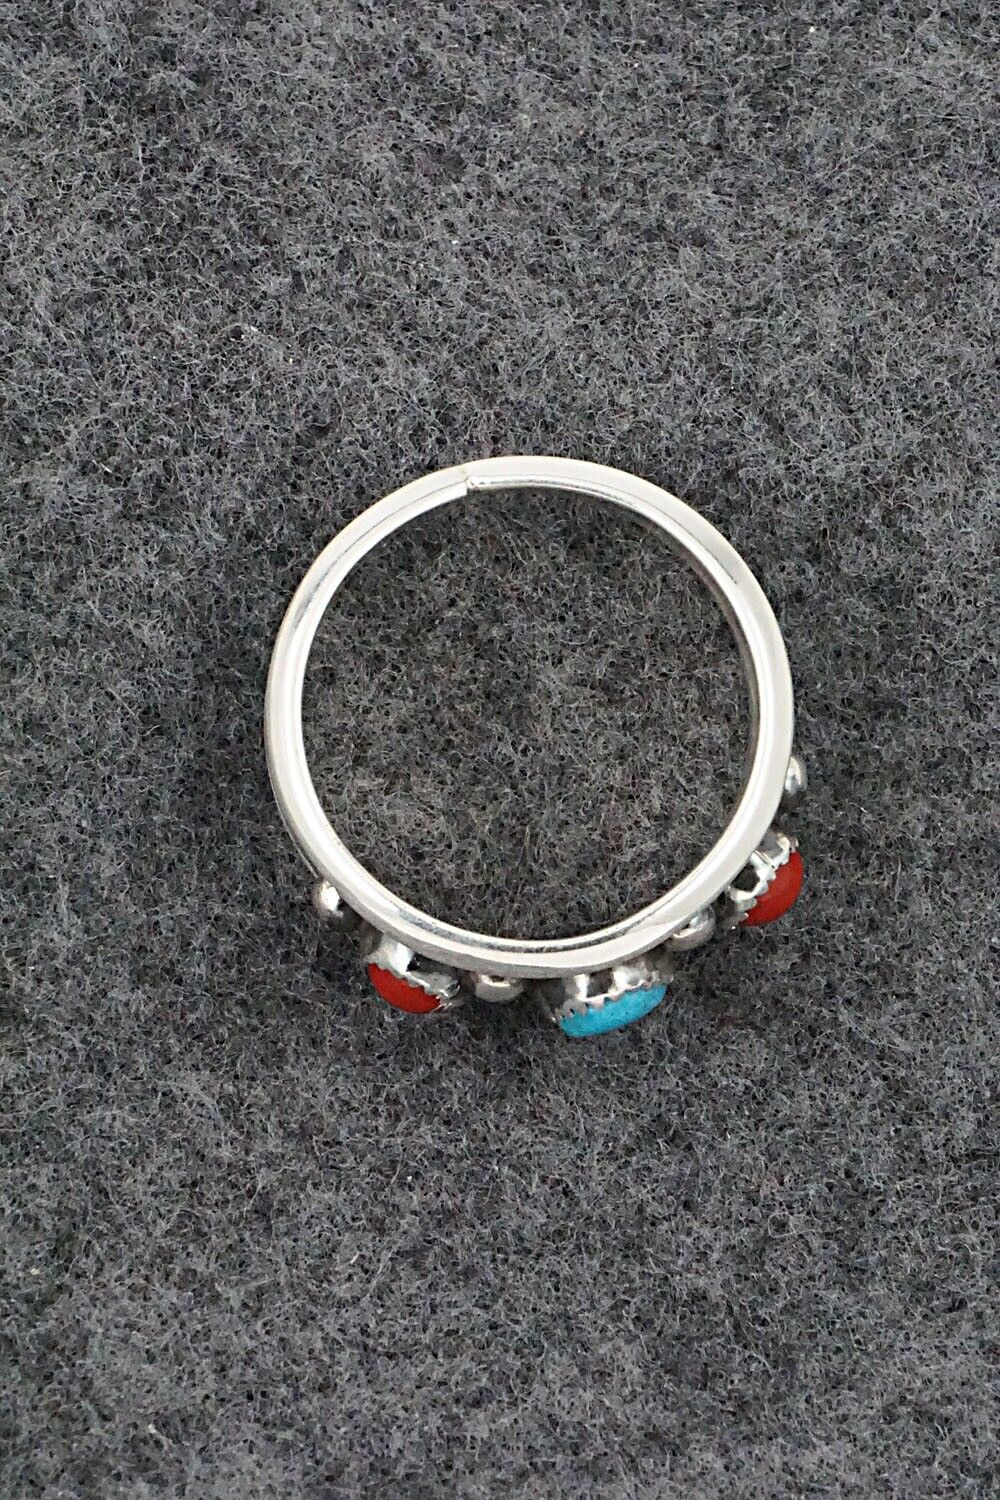 Turquoise, Coral & Sterling Silver Ring - Paul Largo - Size 11.5